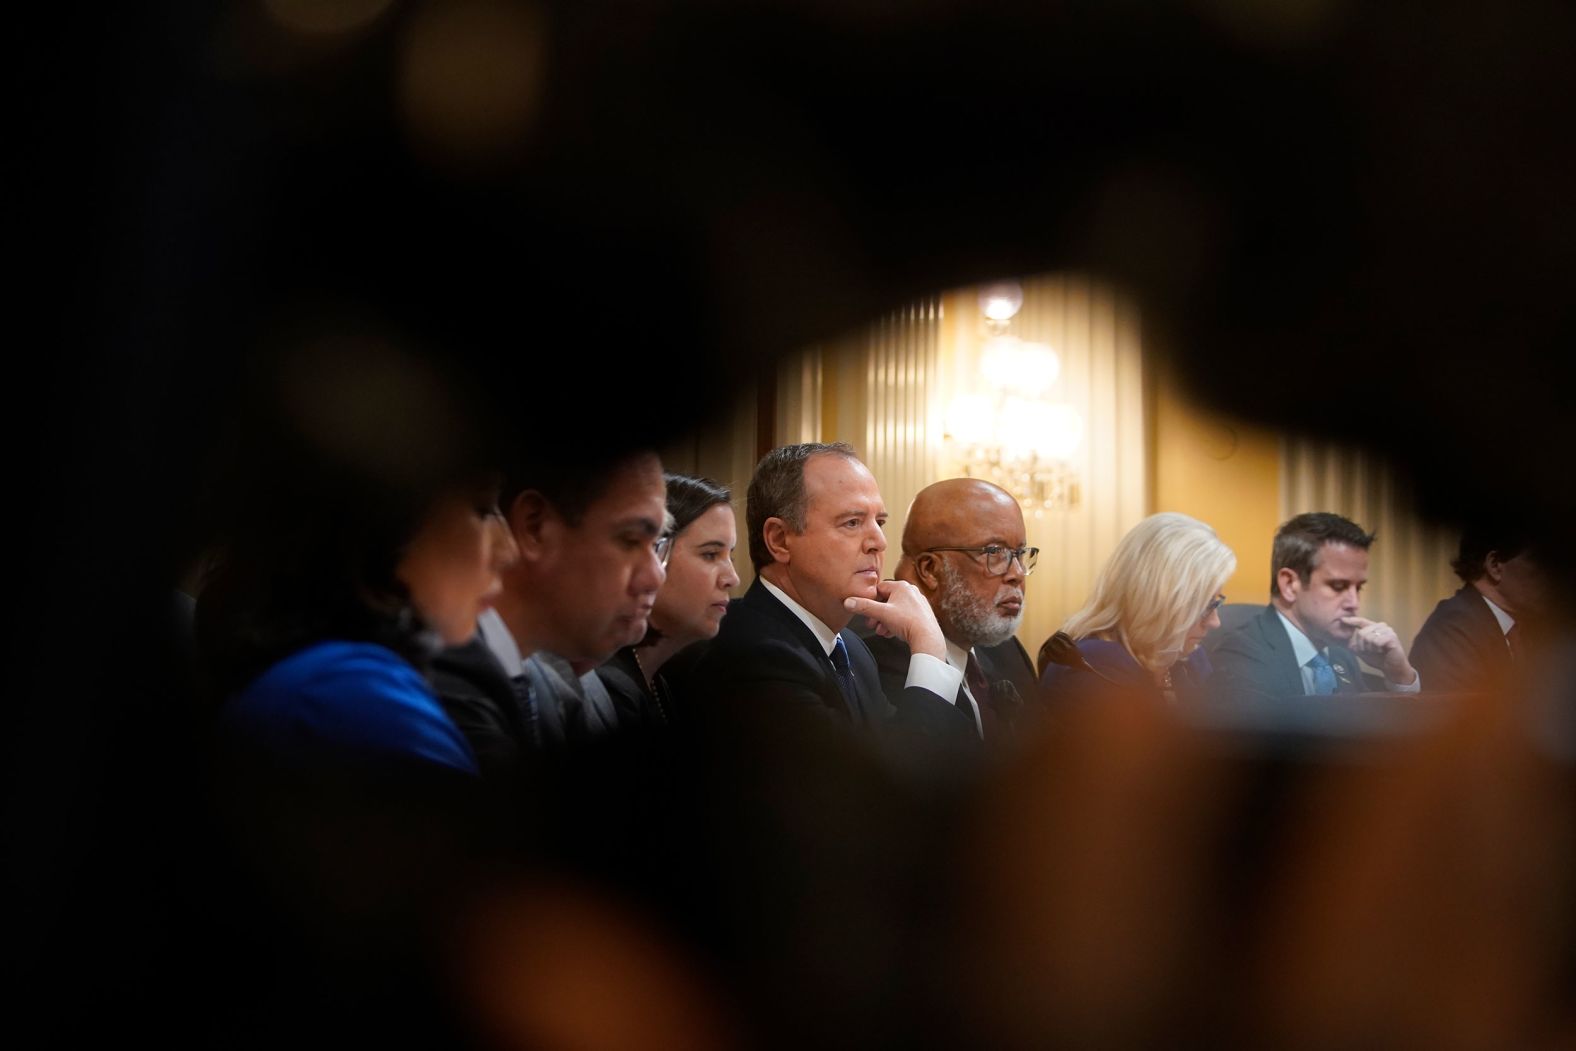 US Rep. Adam Schiff, a Democrat from California, is seen at center with his hand on his chin during the June 21 hearing. <a href="index.php?page=&url=https%3A%2F%2Fwww.cnn.com%2Fpolitics%2Flive-news%2Fjanuary-6-hearings-june-21%2Fh_7553a8b338ef39a835f7d4d25801c479" target="_blank">Schiff played a lead role in the hearing.</a>